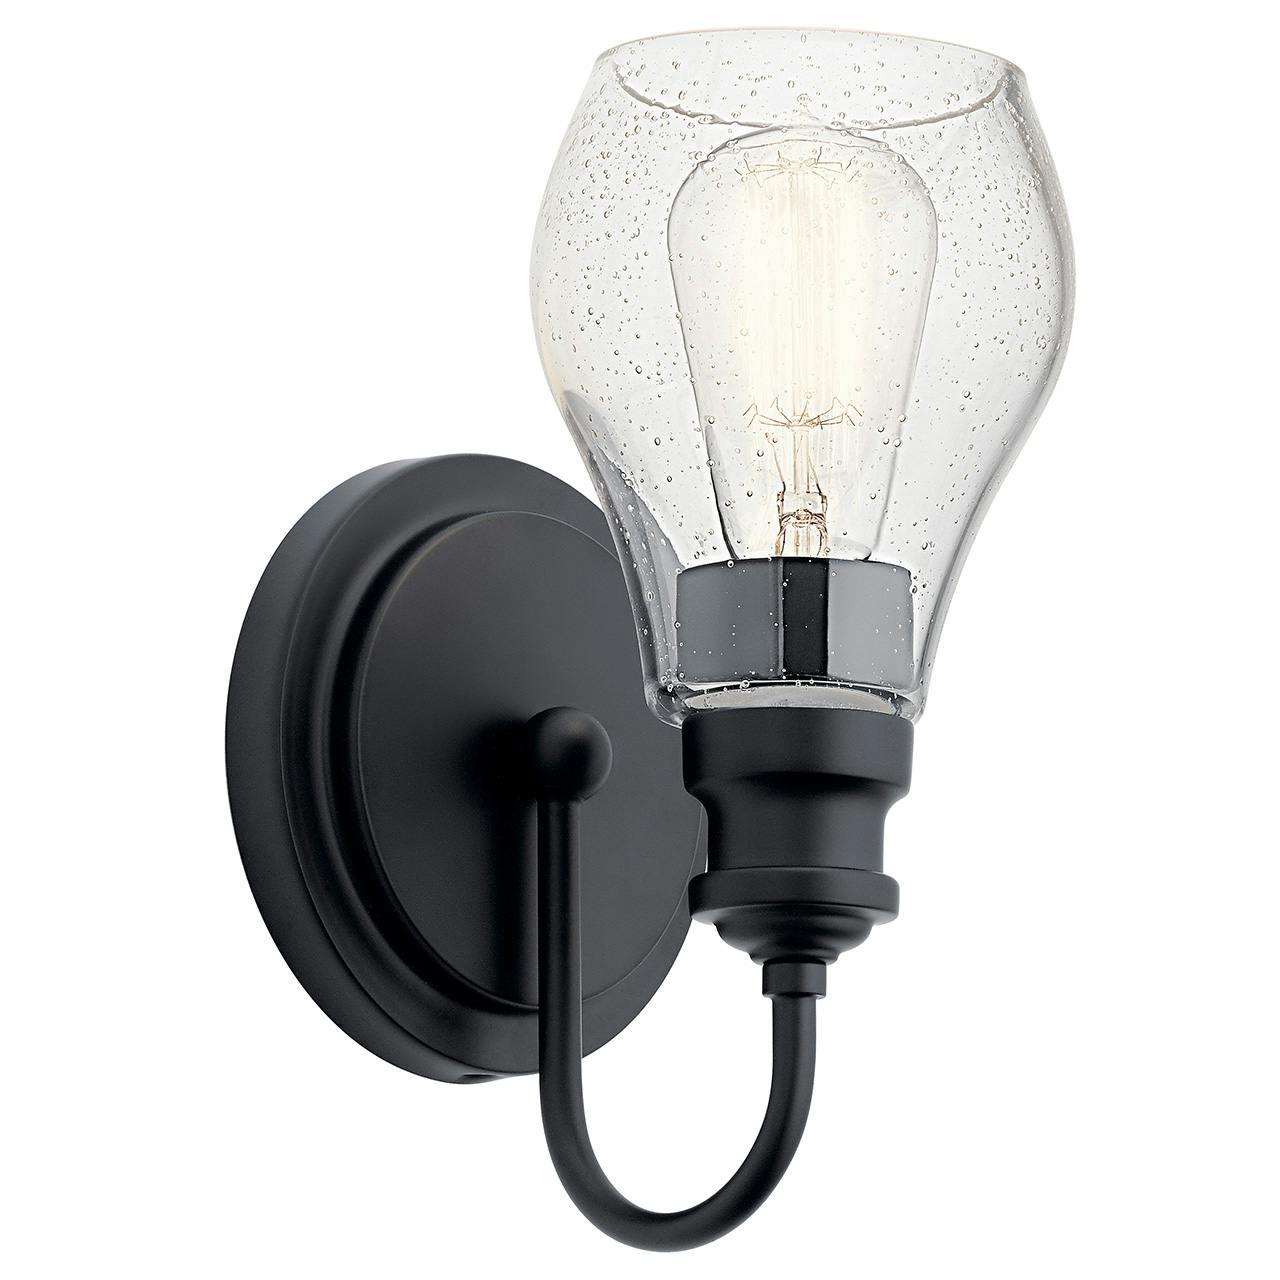 Greenbrier™ 1 Light Wall Sconce Black on a white background